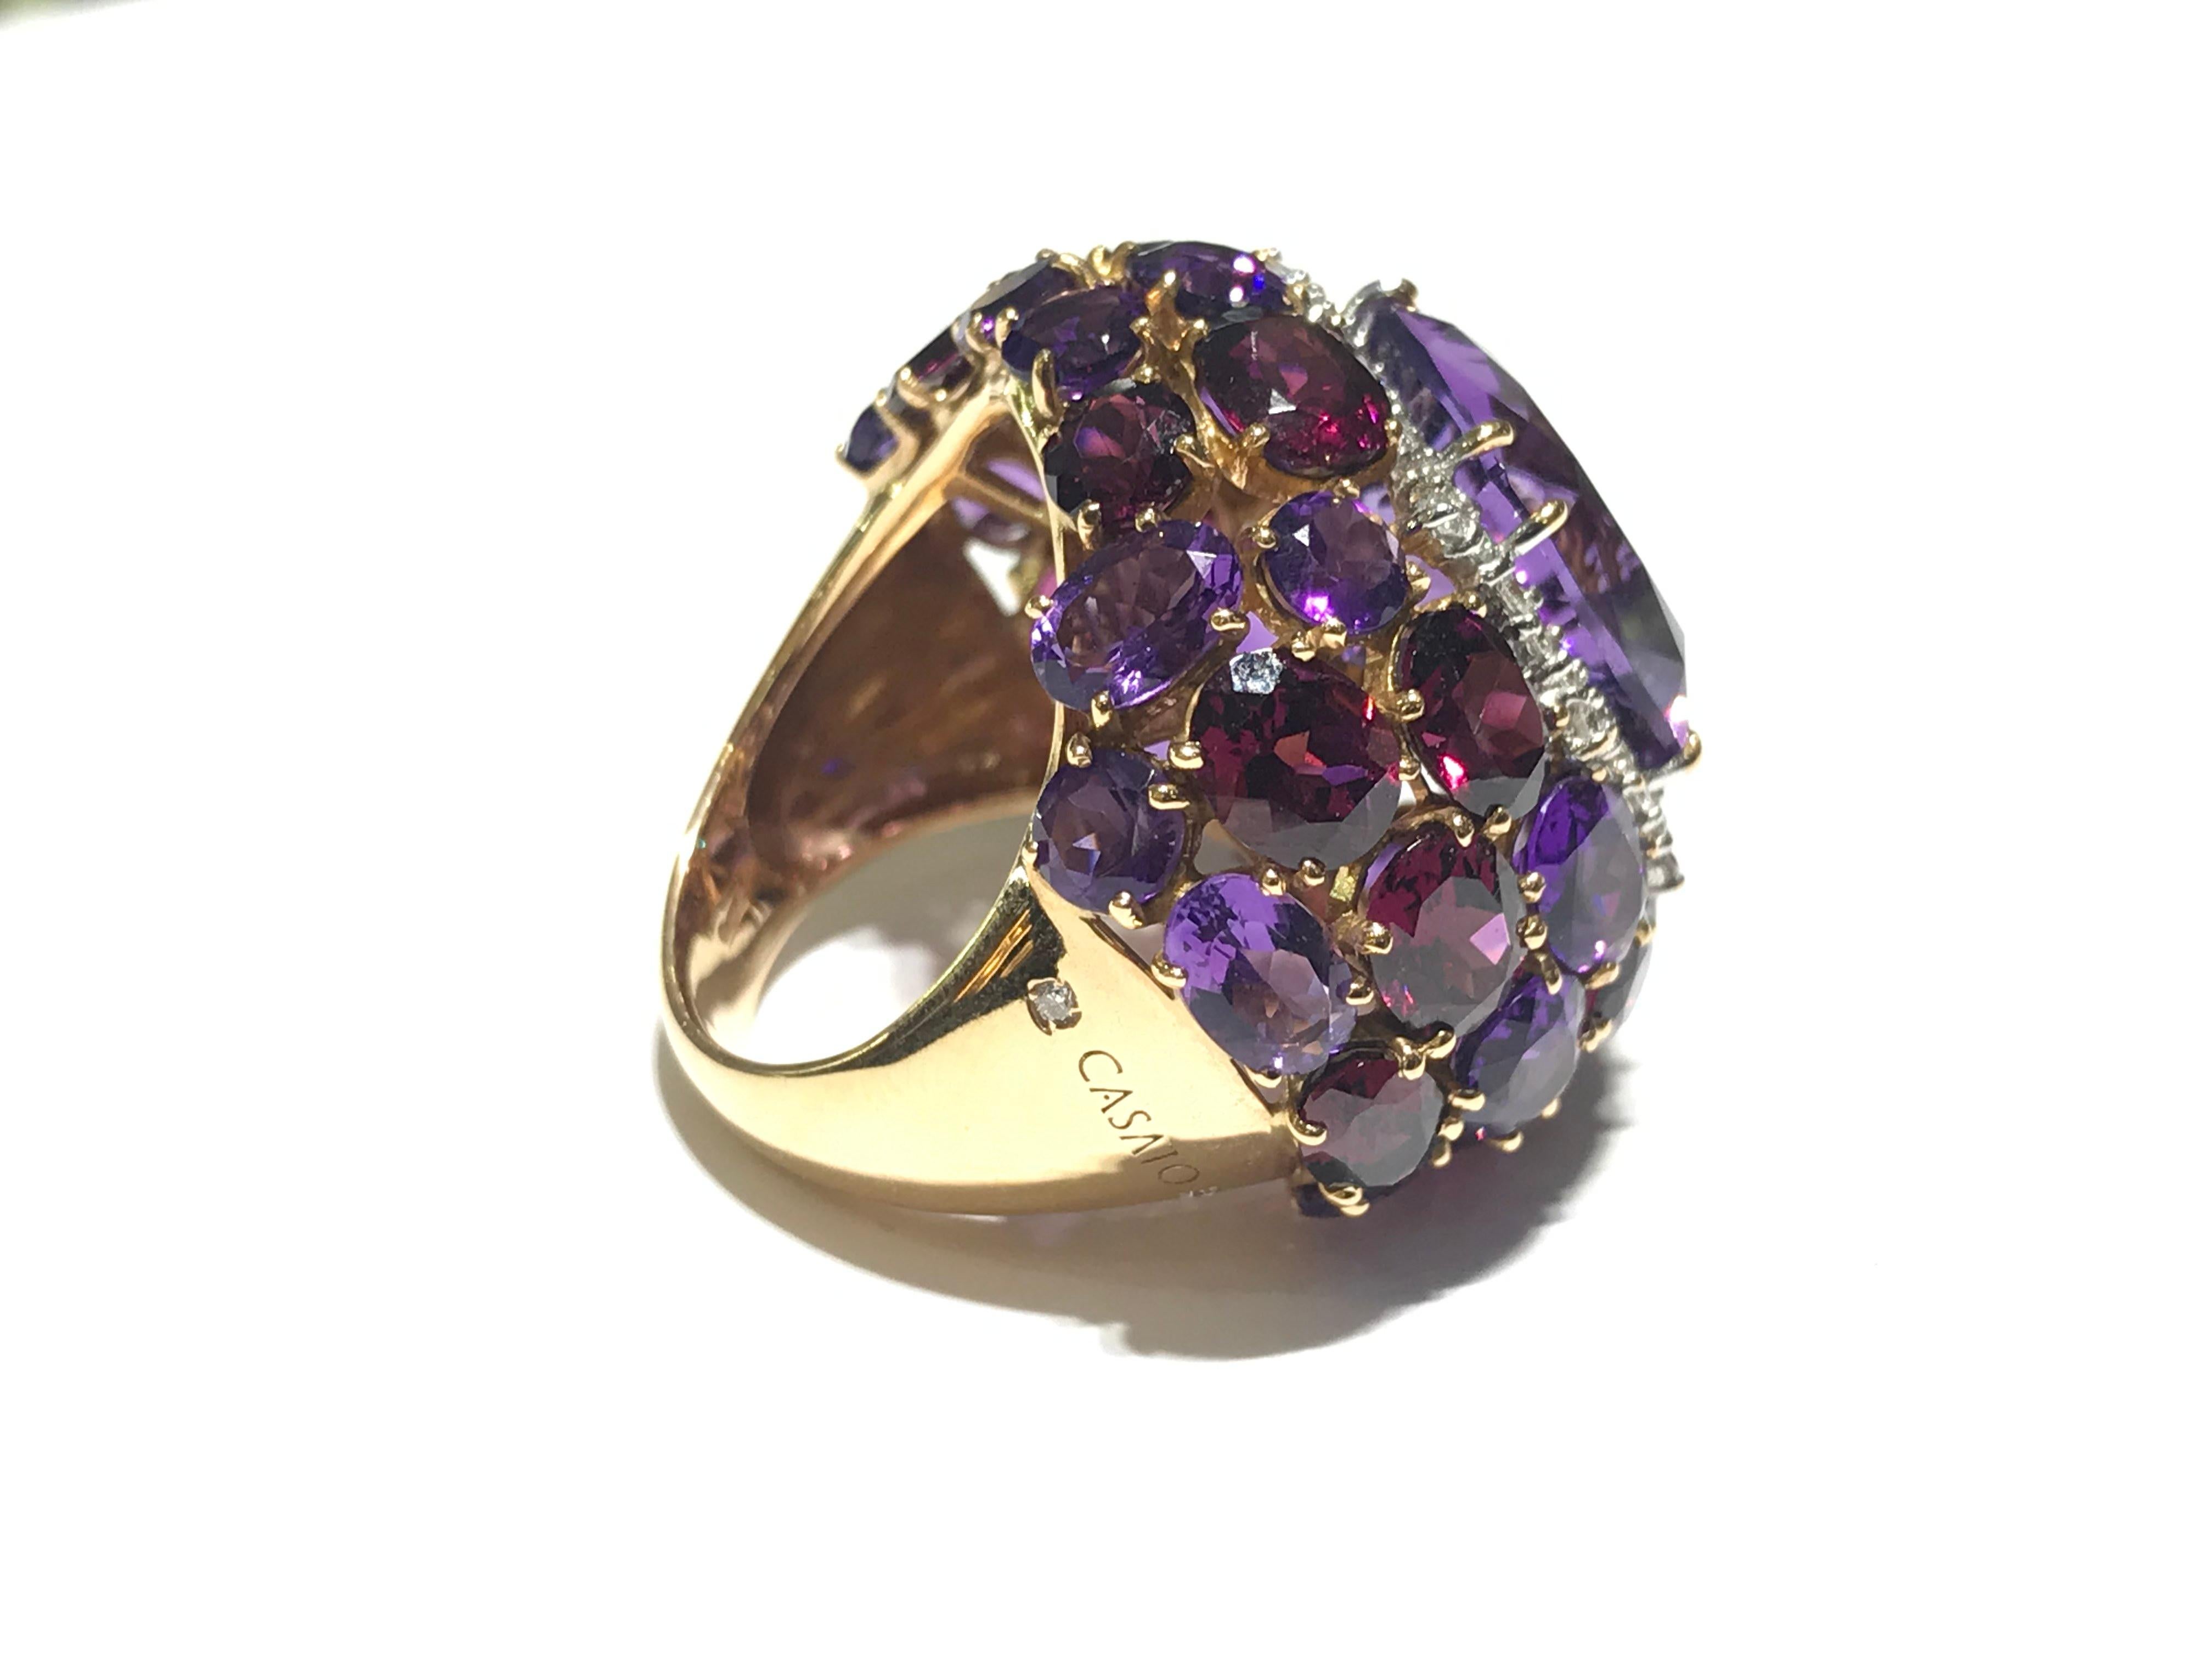 MIMI purple Amethyst Cocktail ring in 18kt pink gold and diamond halo
0.53 ct white diamond Halo 
Amethyst stone Cocktail ring
18kt pink gold 
